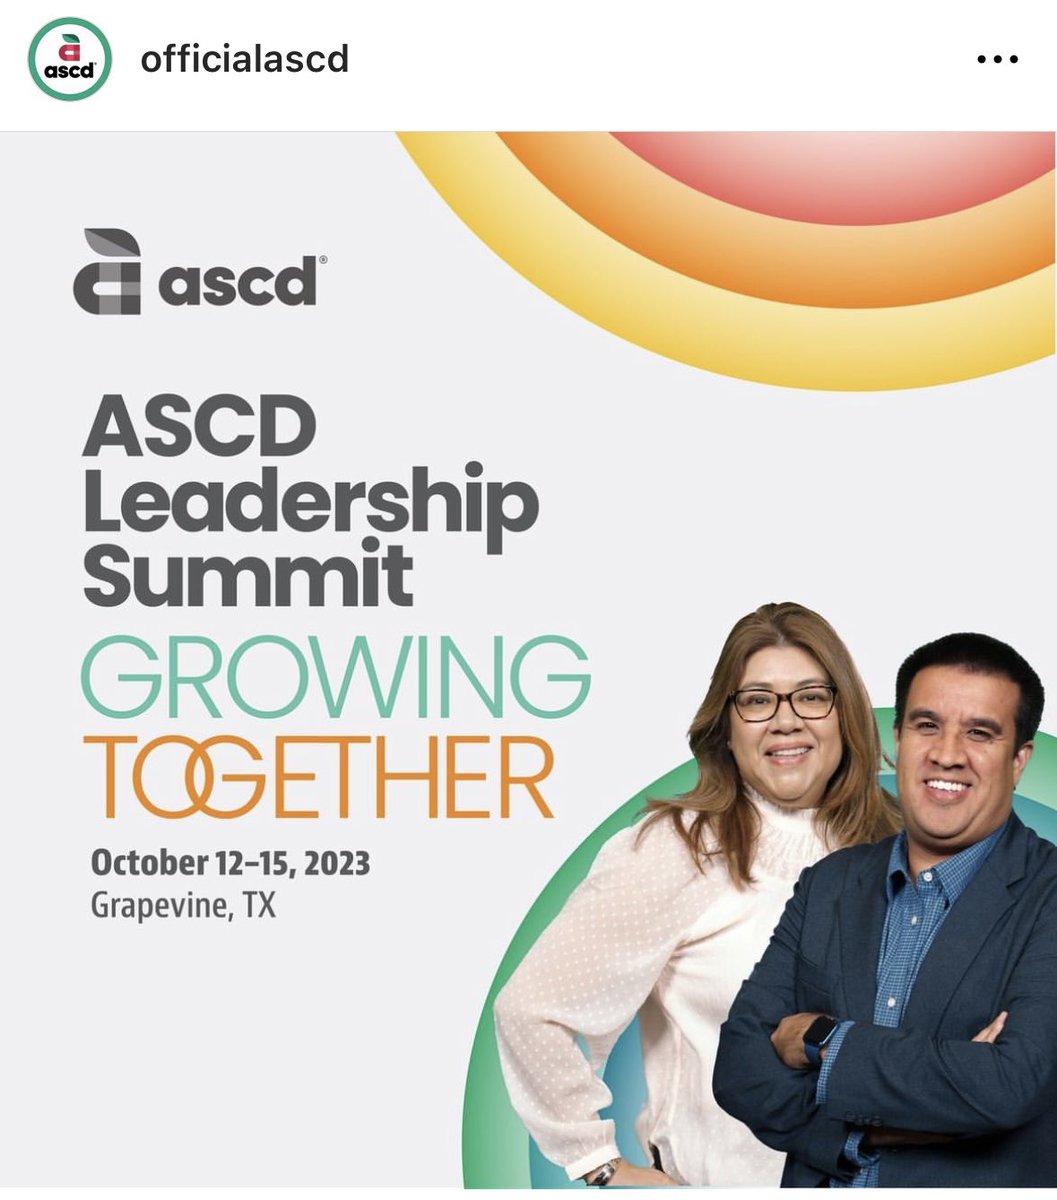 On my way to #ASCDleadershipsummit! Looking forward to learning and networking. Who else will be there? Let’s connect! @ASCD @HawaiiASCD